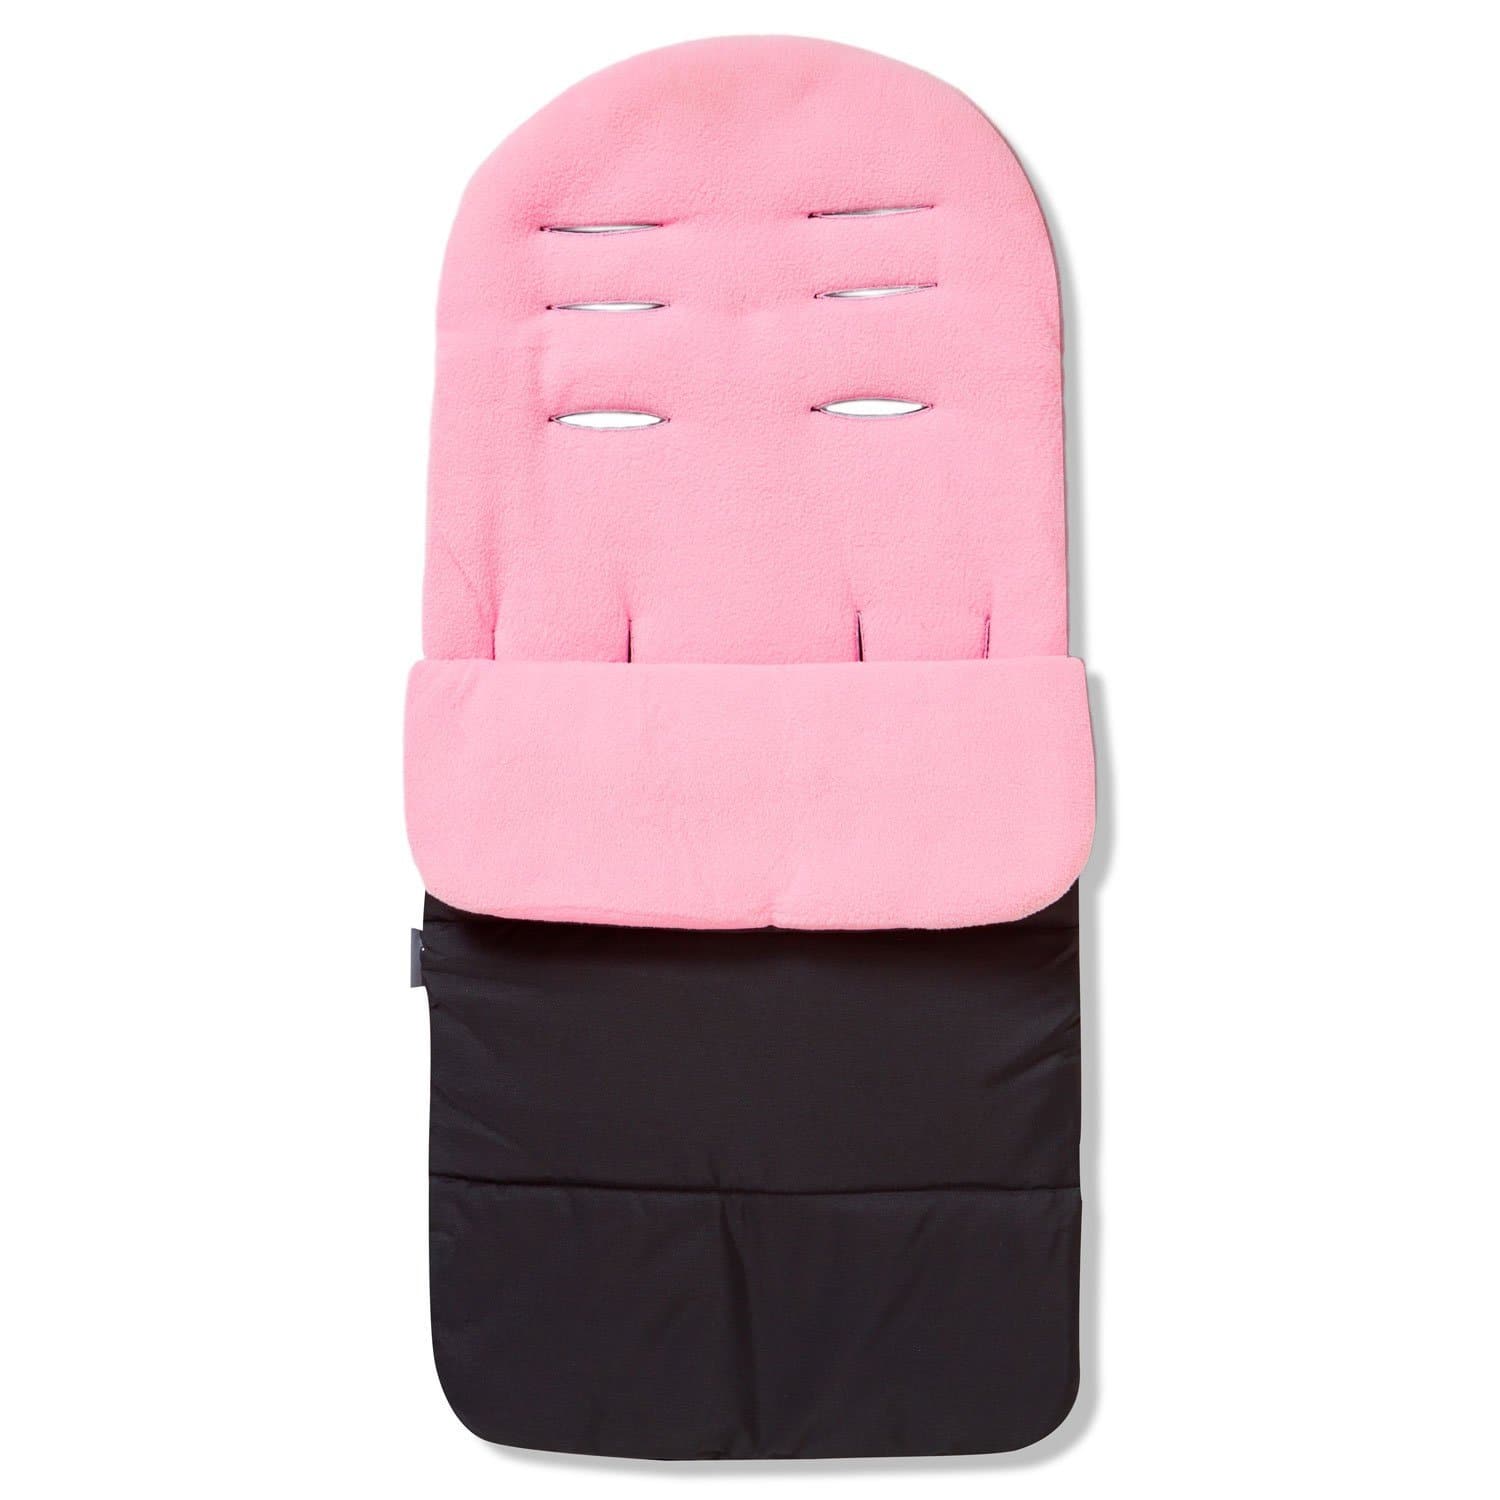 Premium Footmuff / Cosy Toes Compatible with Diono - Candy Pink / Fits All Models | For Your Little One